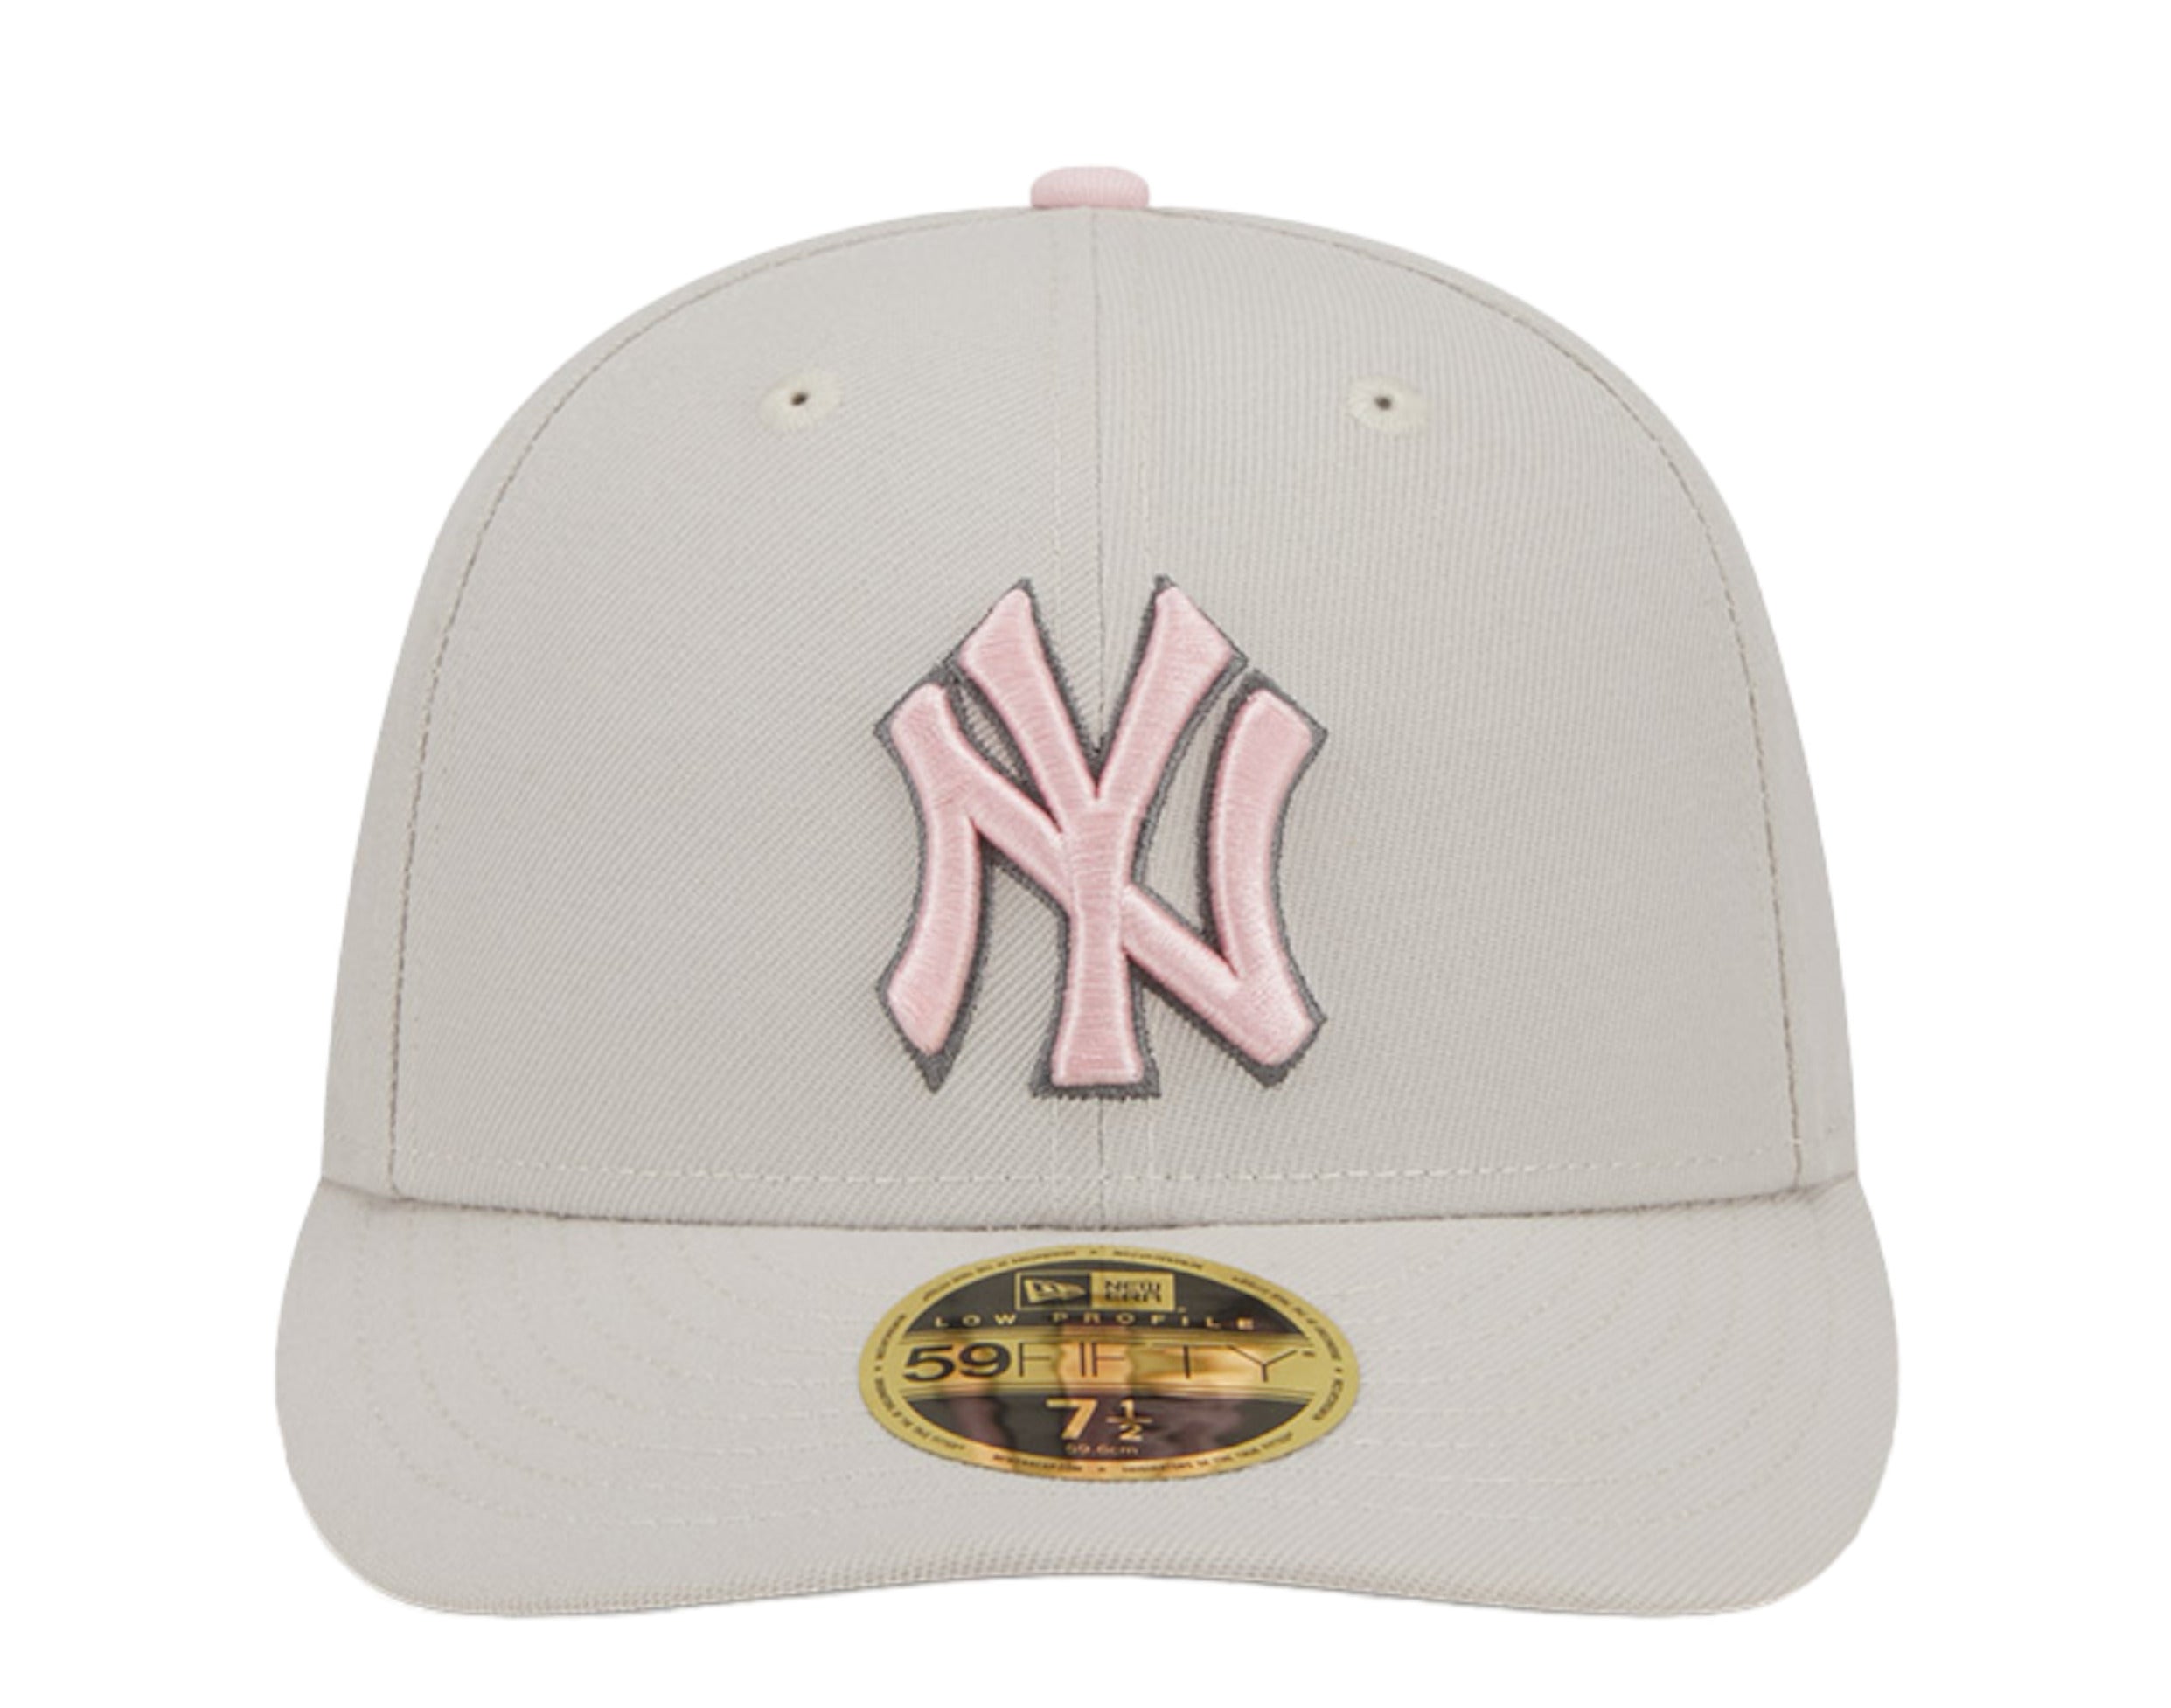 Yankees wear pink on Mother's Day